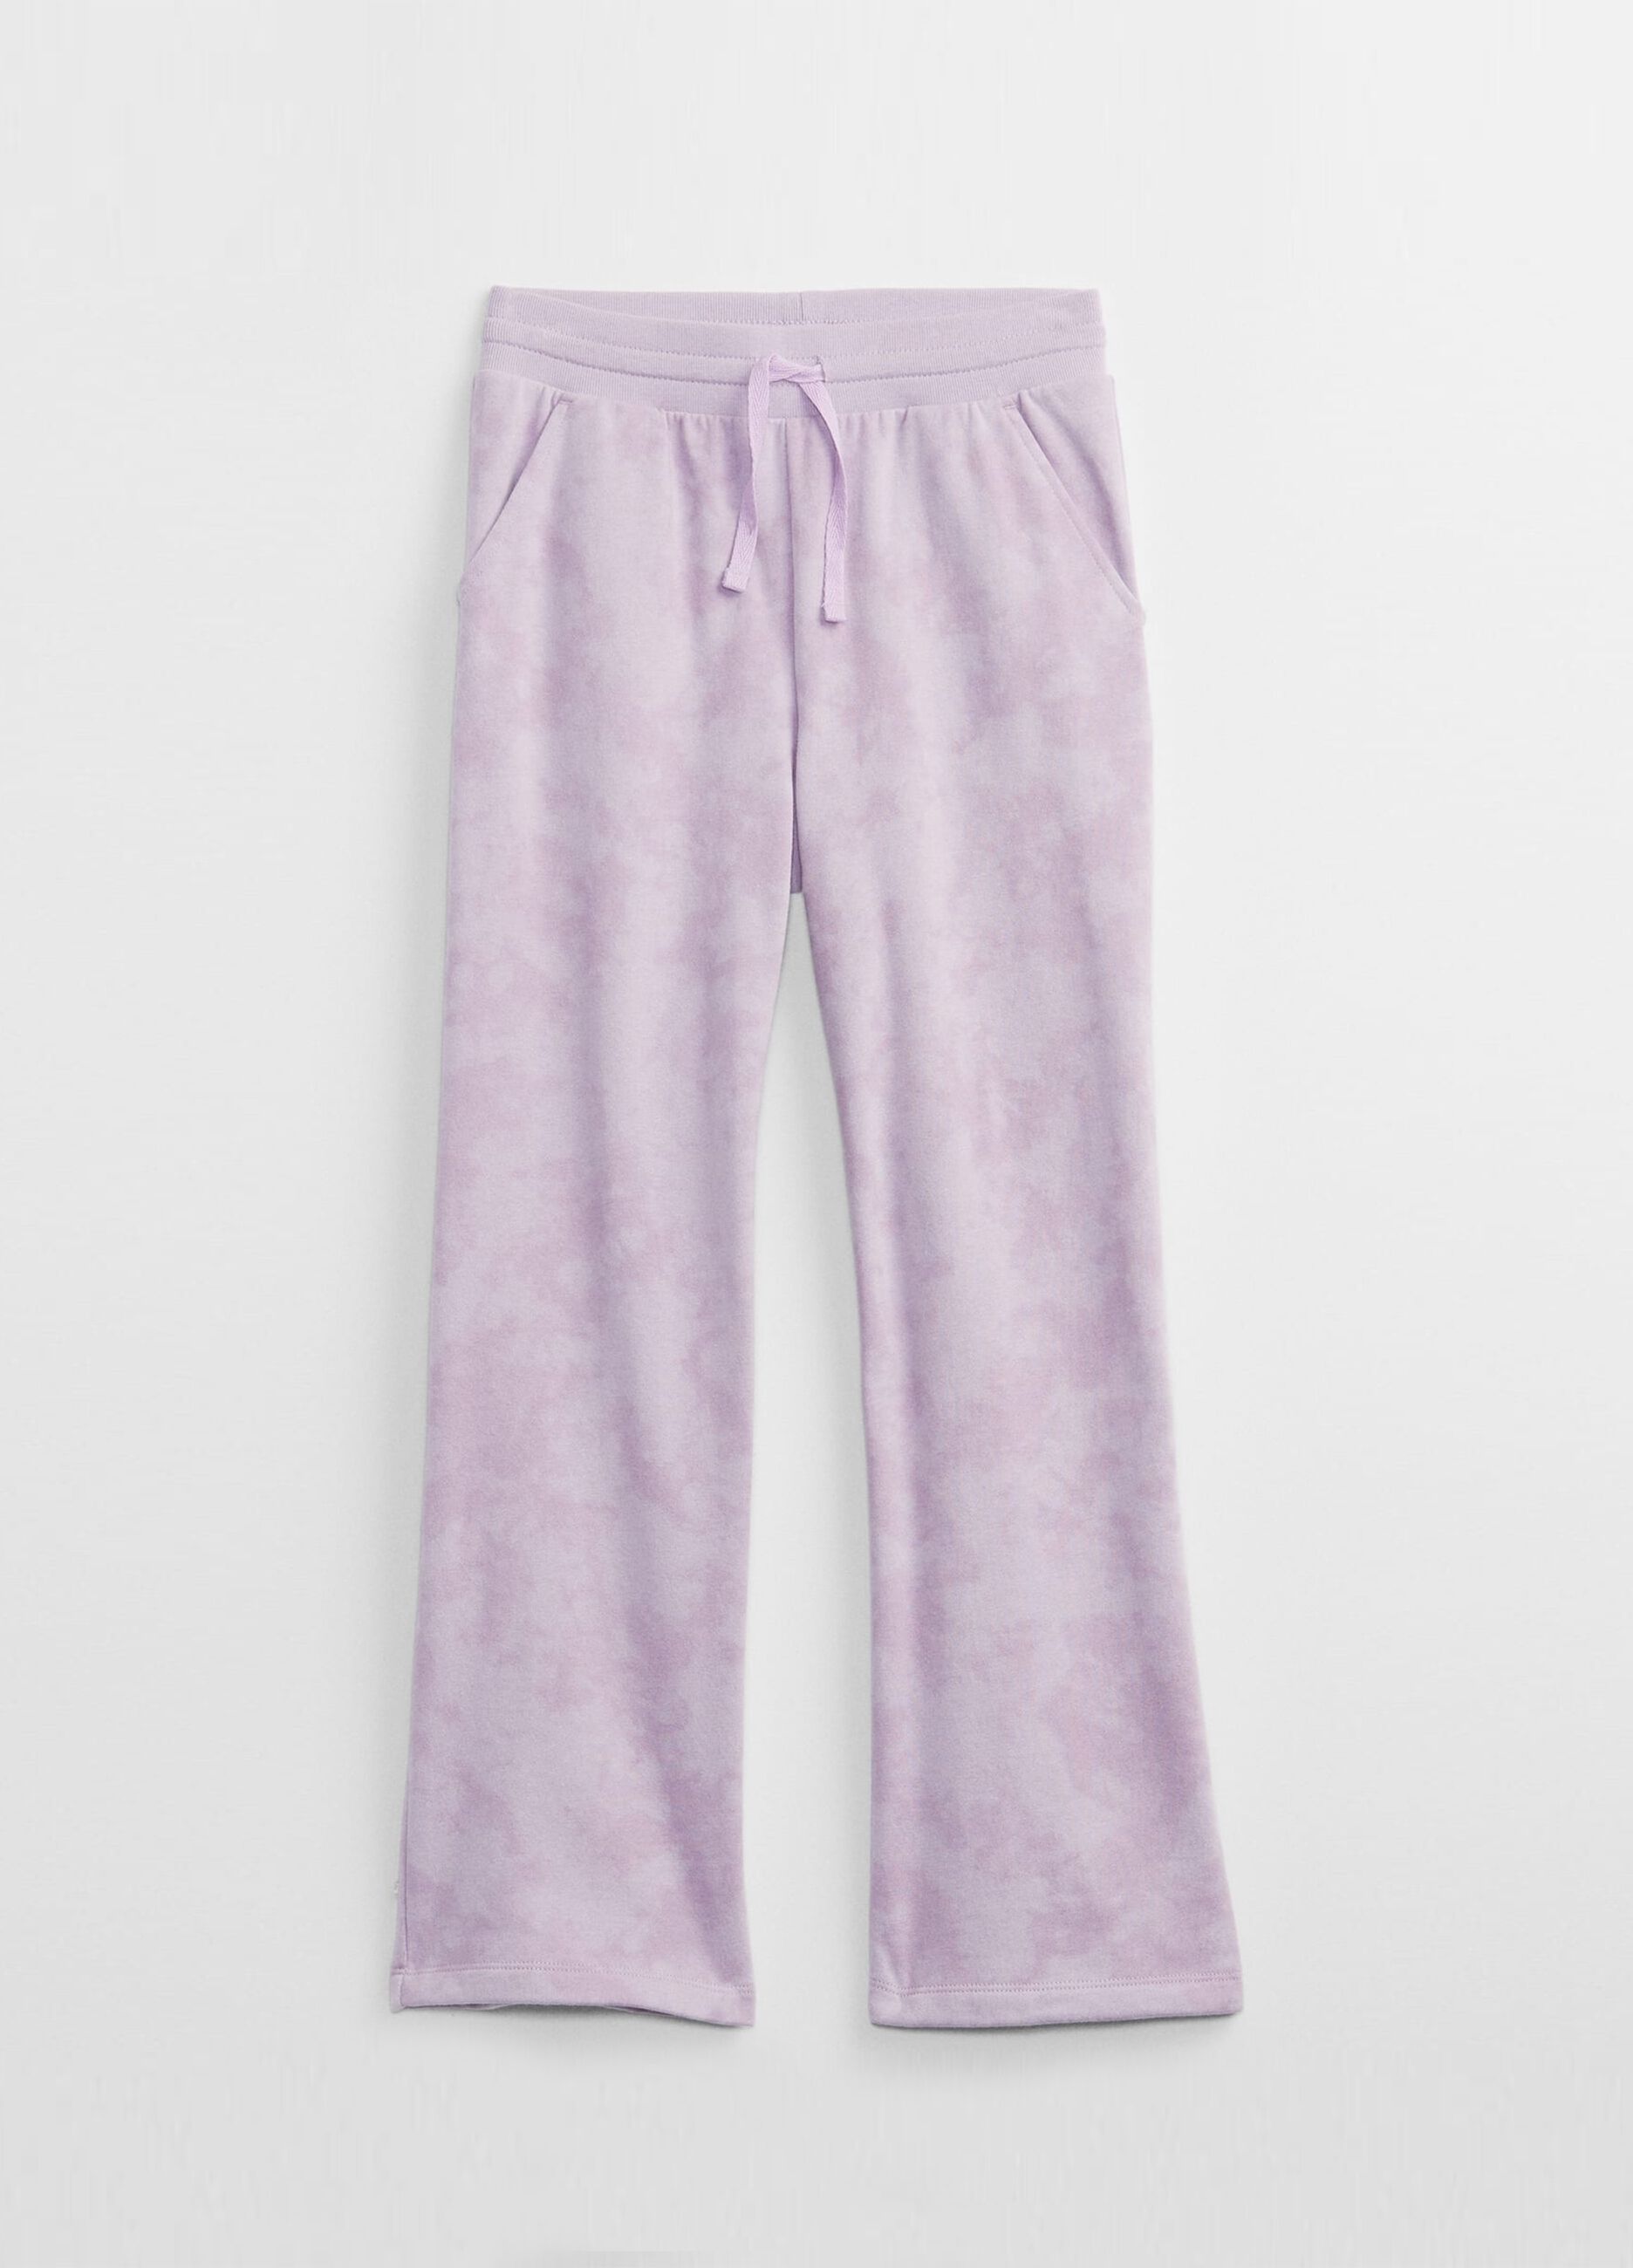 Flare-fit joggers with Tie-dye print